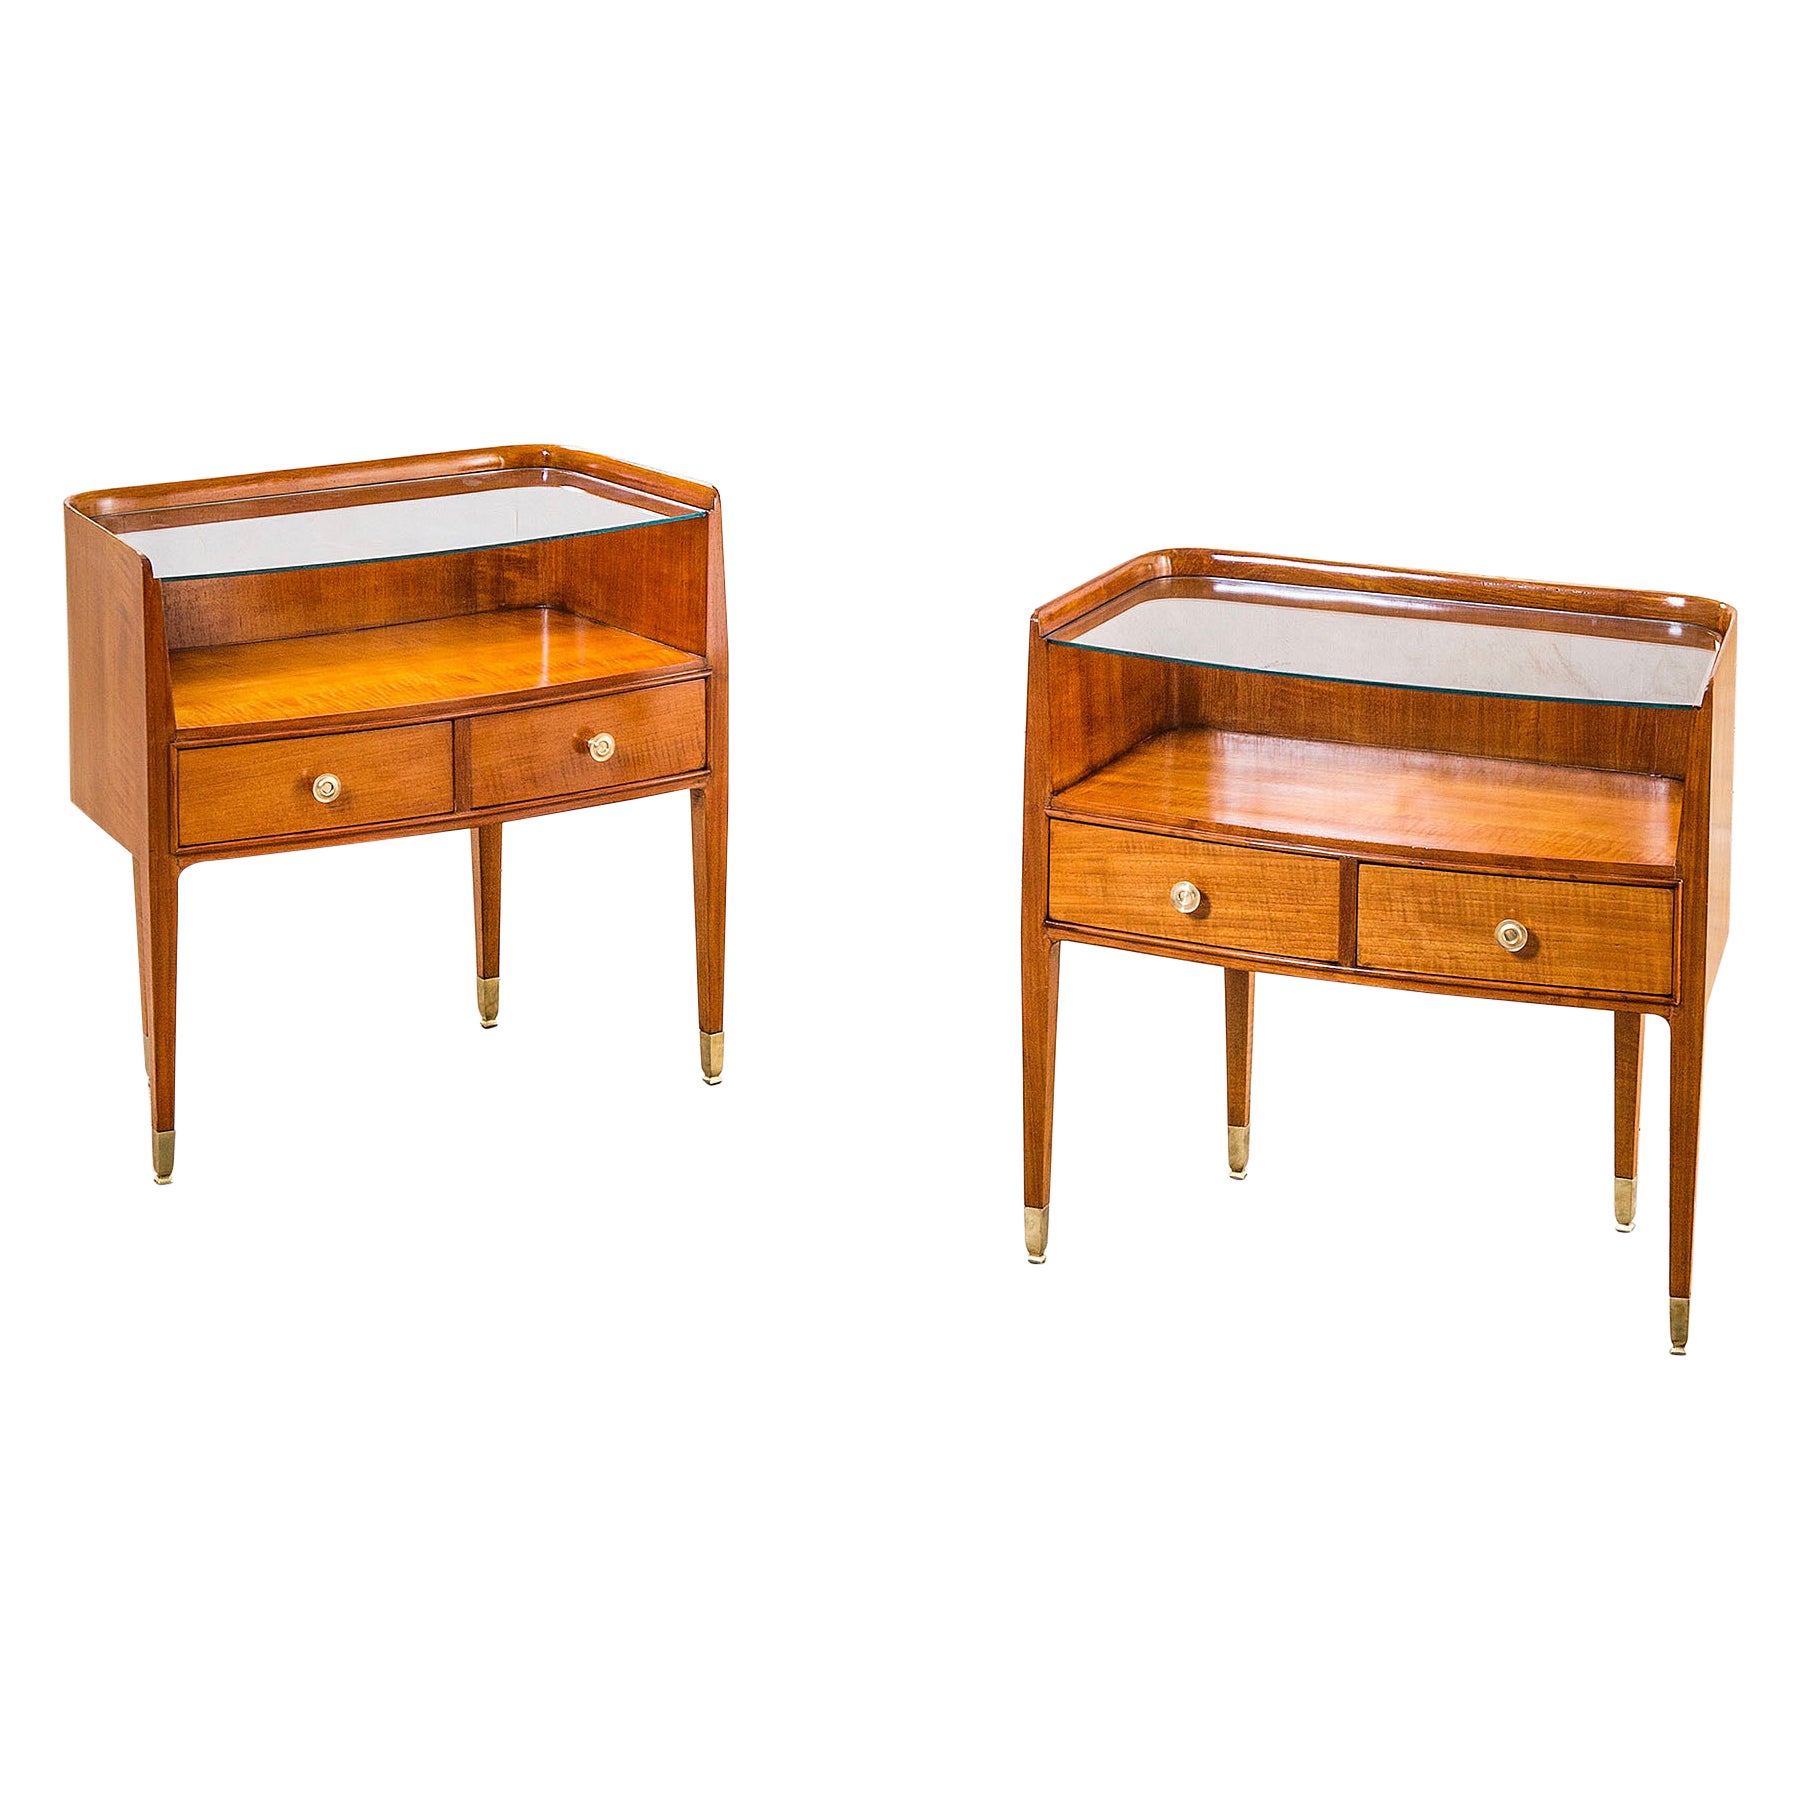 20th Century Paolo Buffa Pair of Nightstands in Wood for Serafino Arrighi, 50s